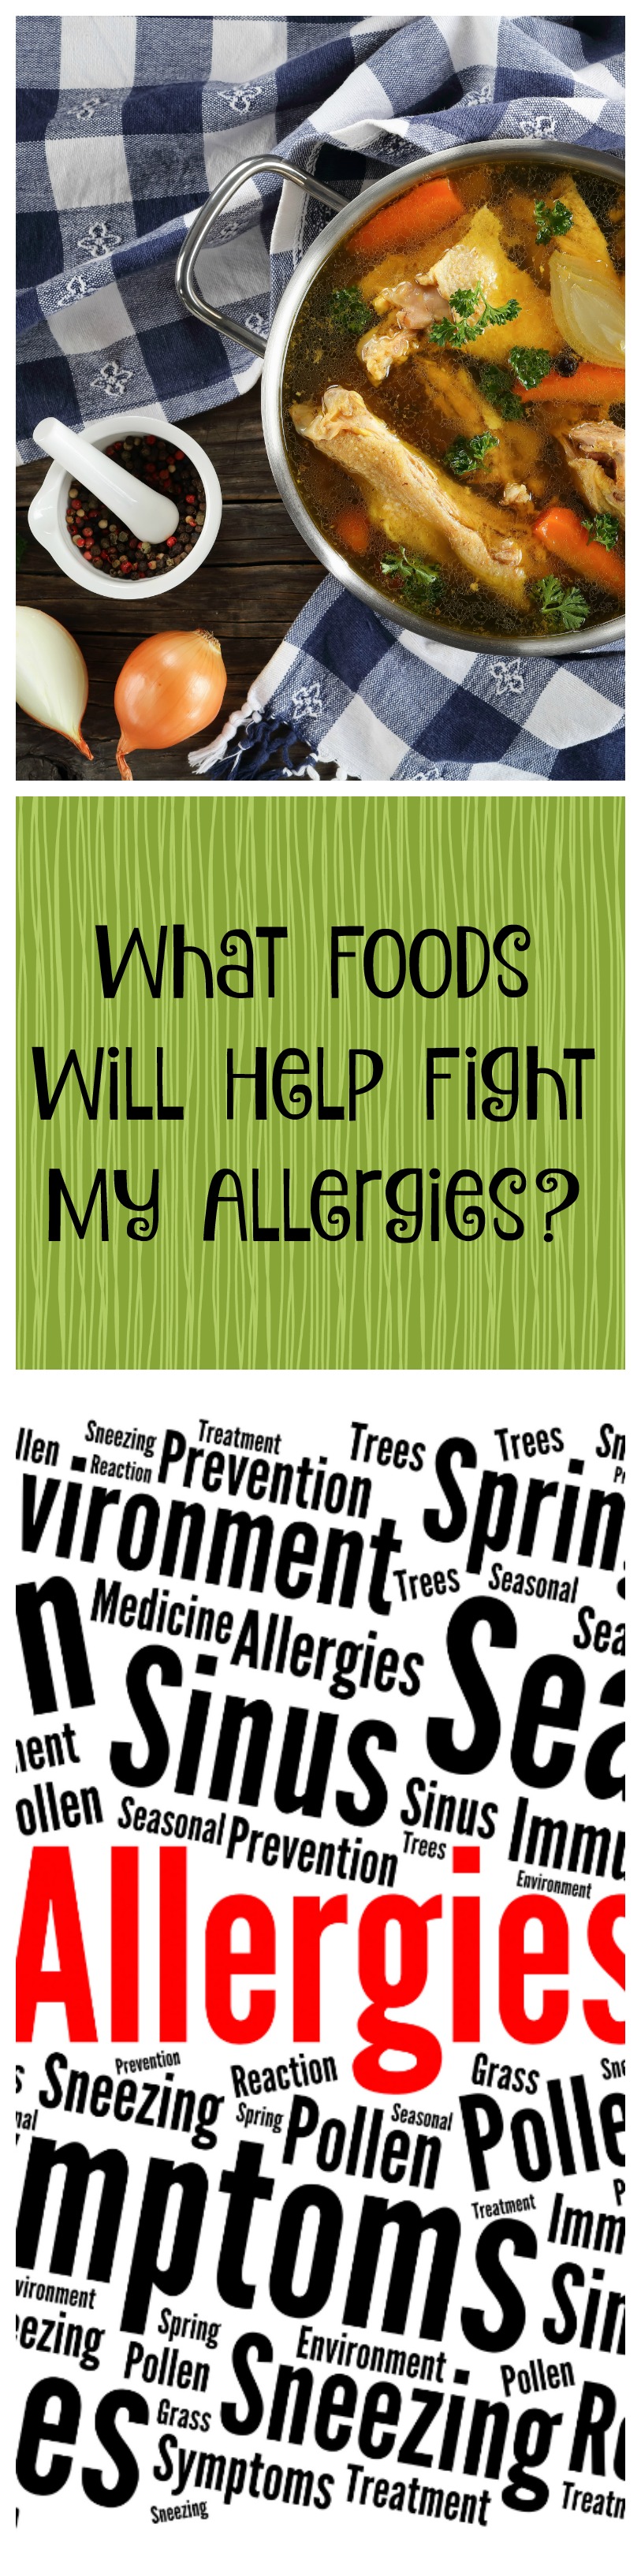 foods to fight allergies